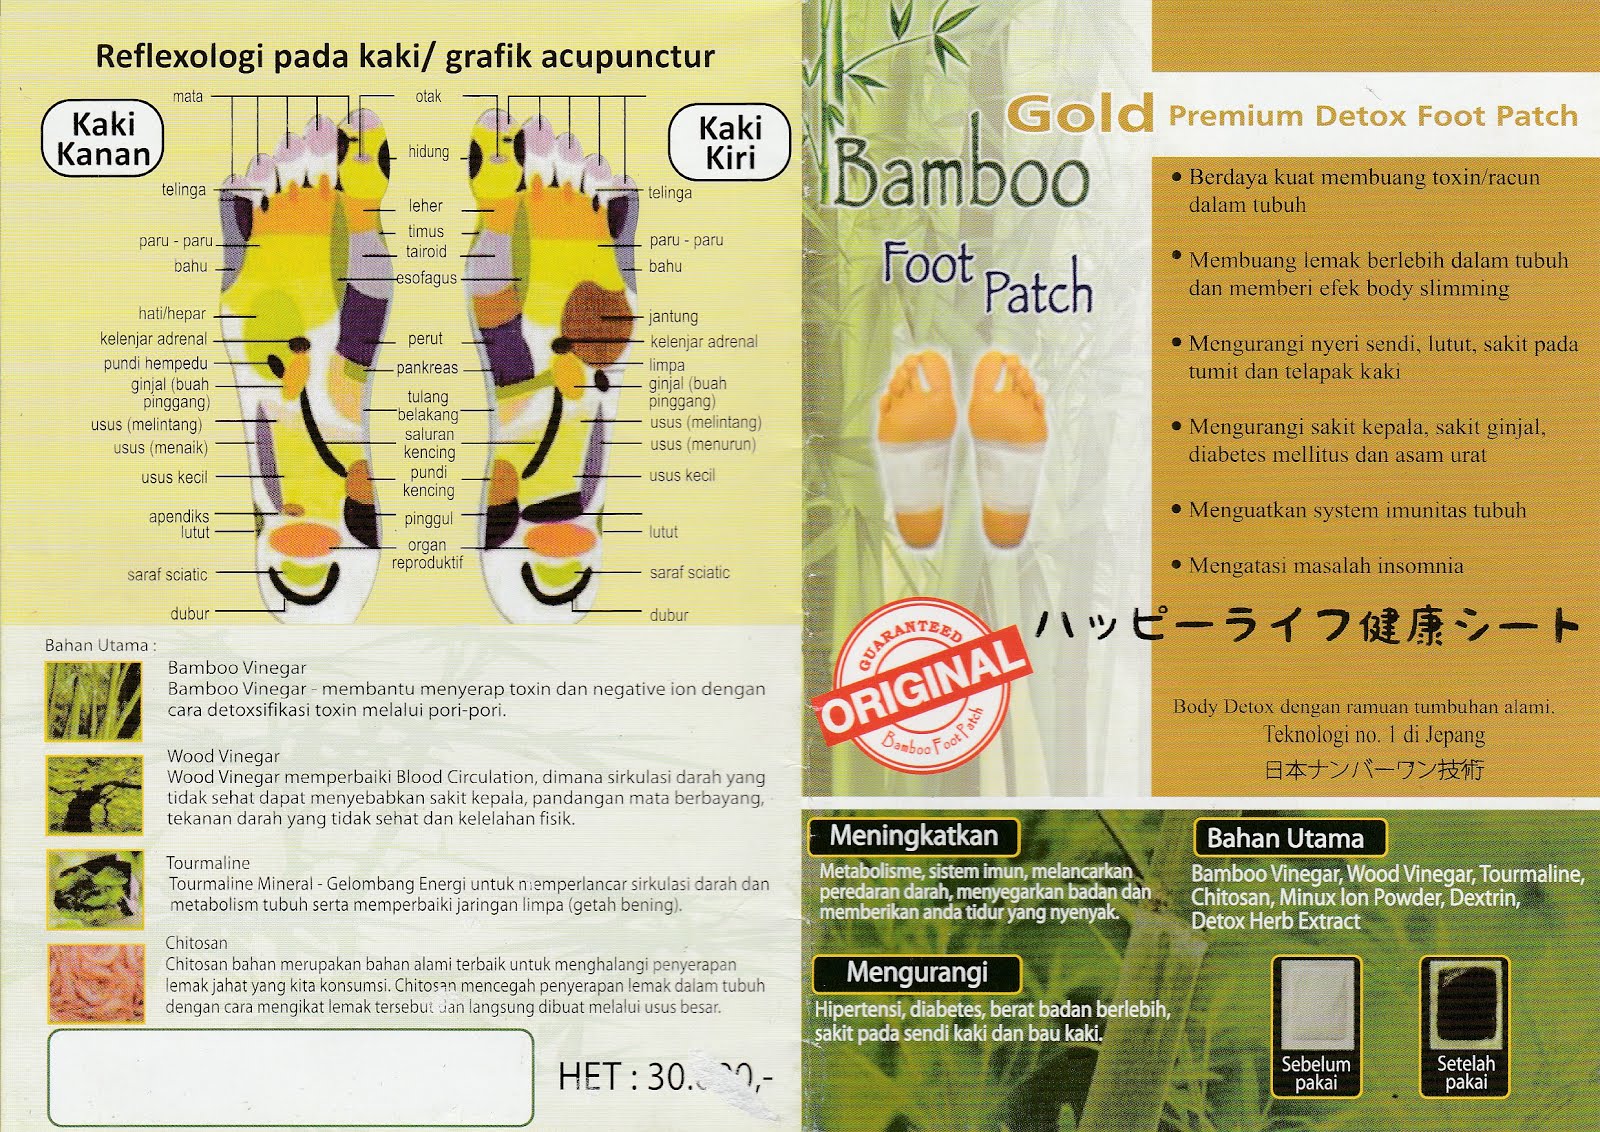 Bamboo foot patch